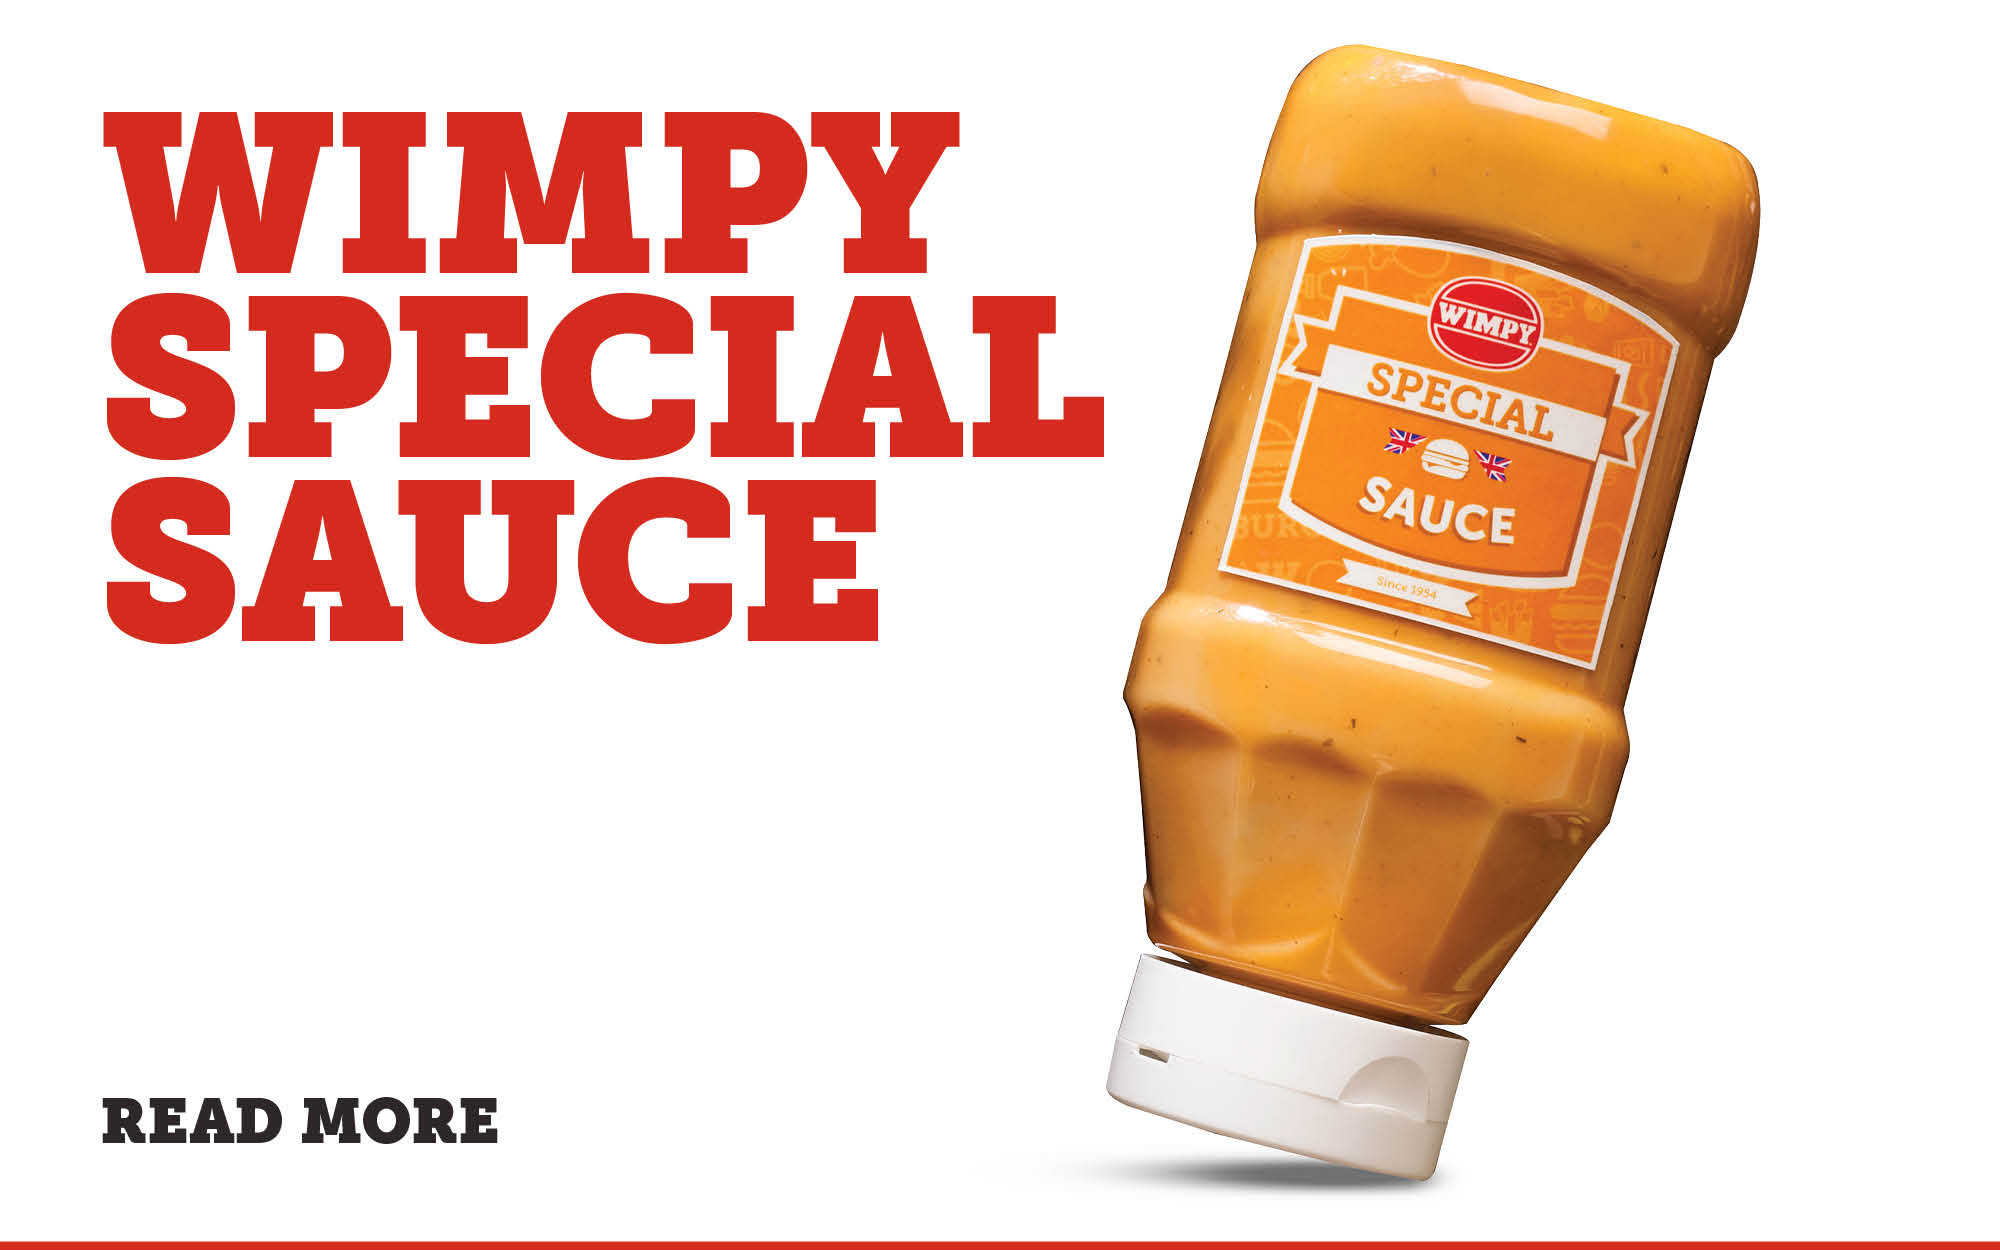 Wimpy Special Sauce image